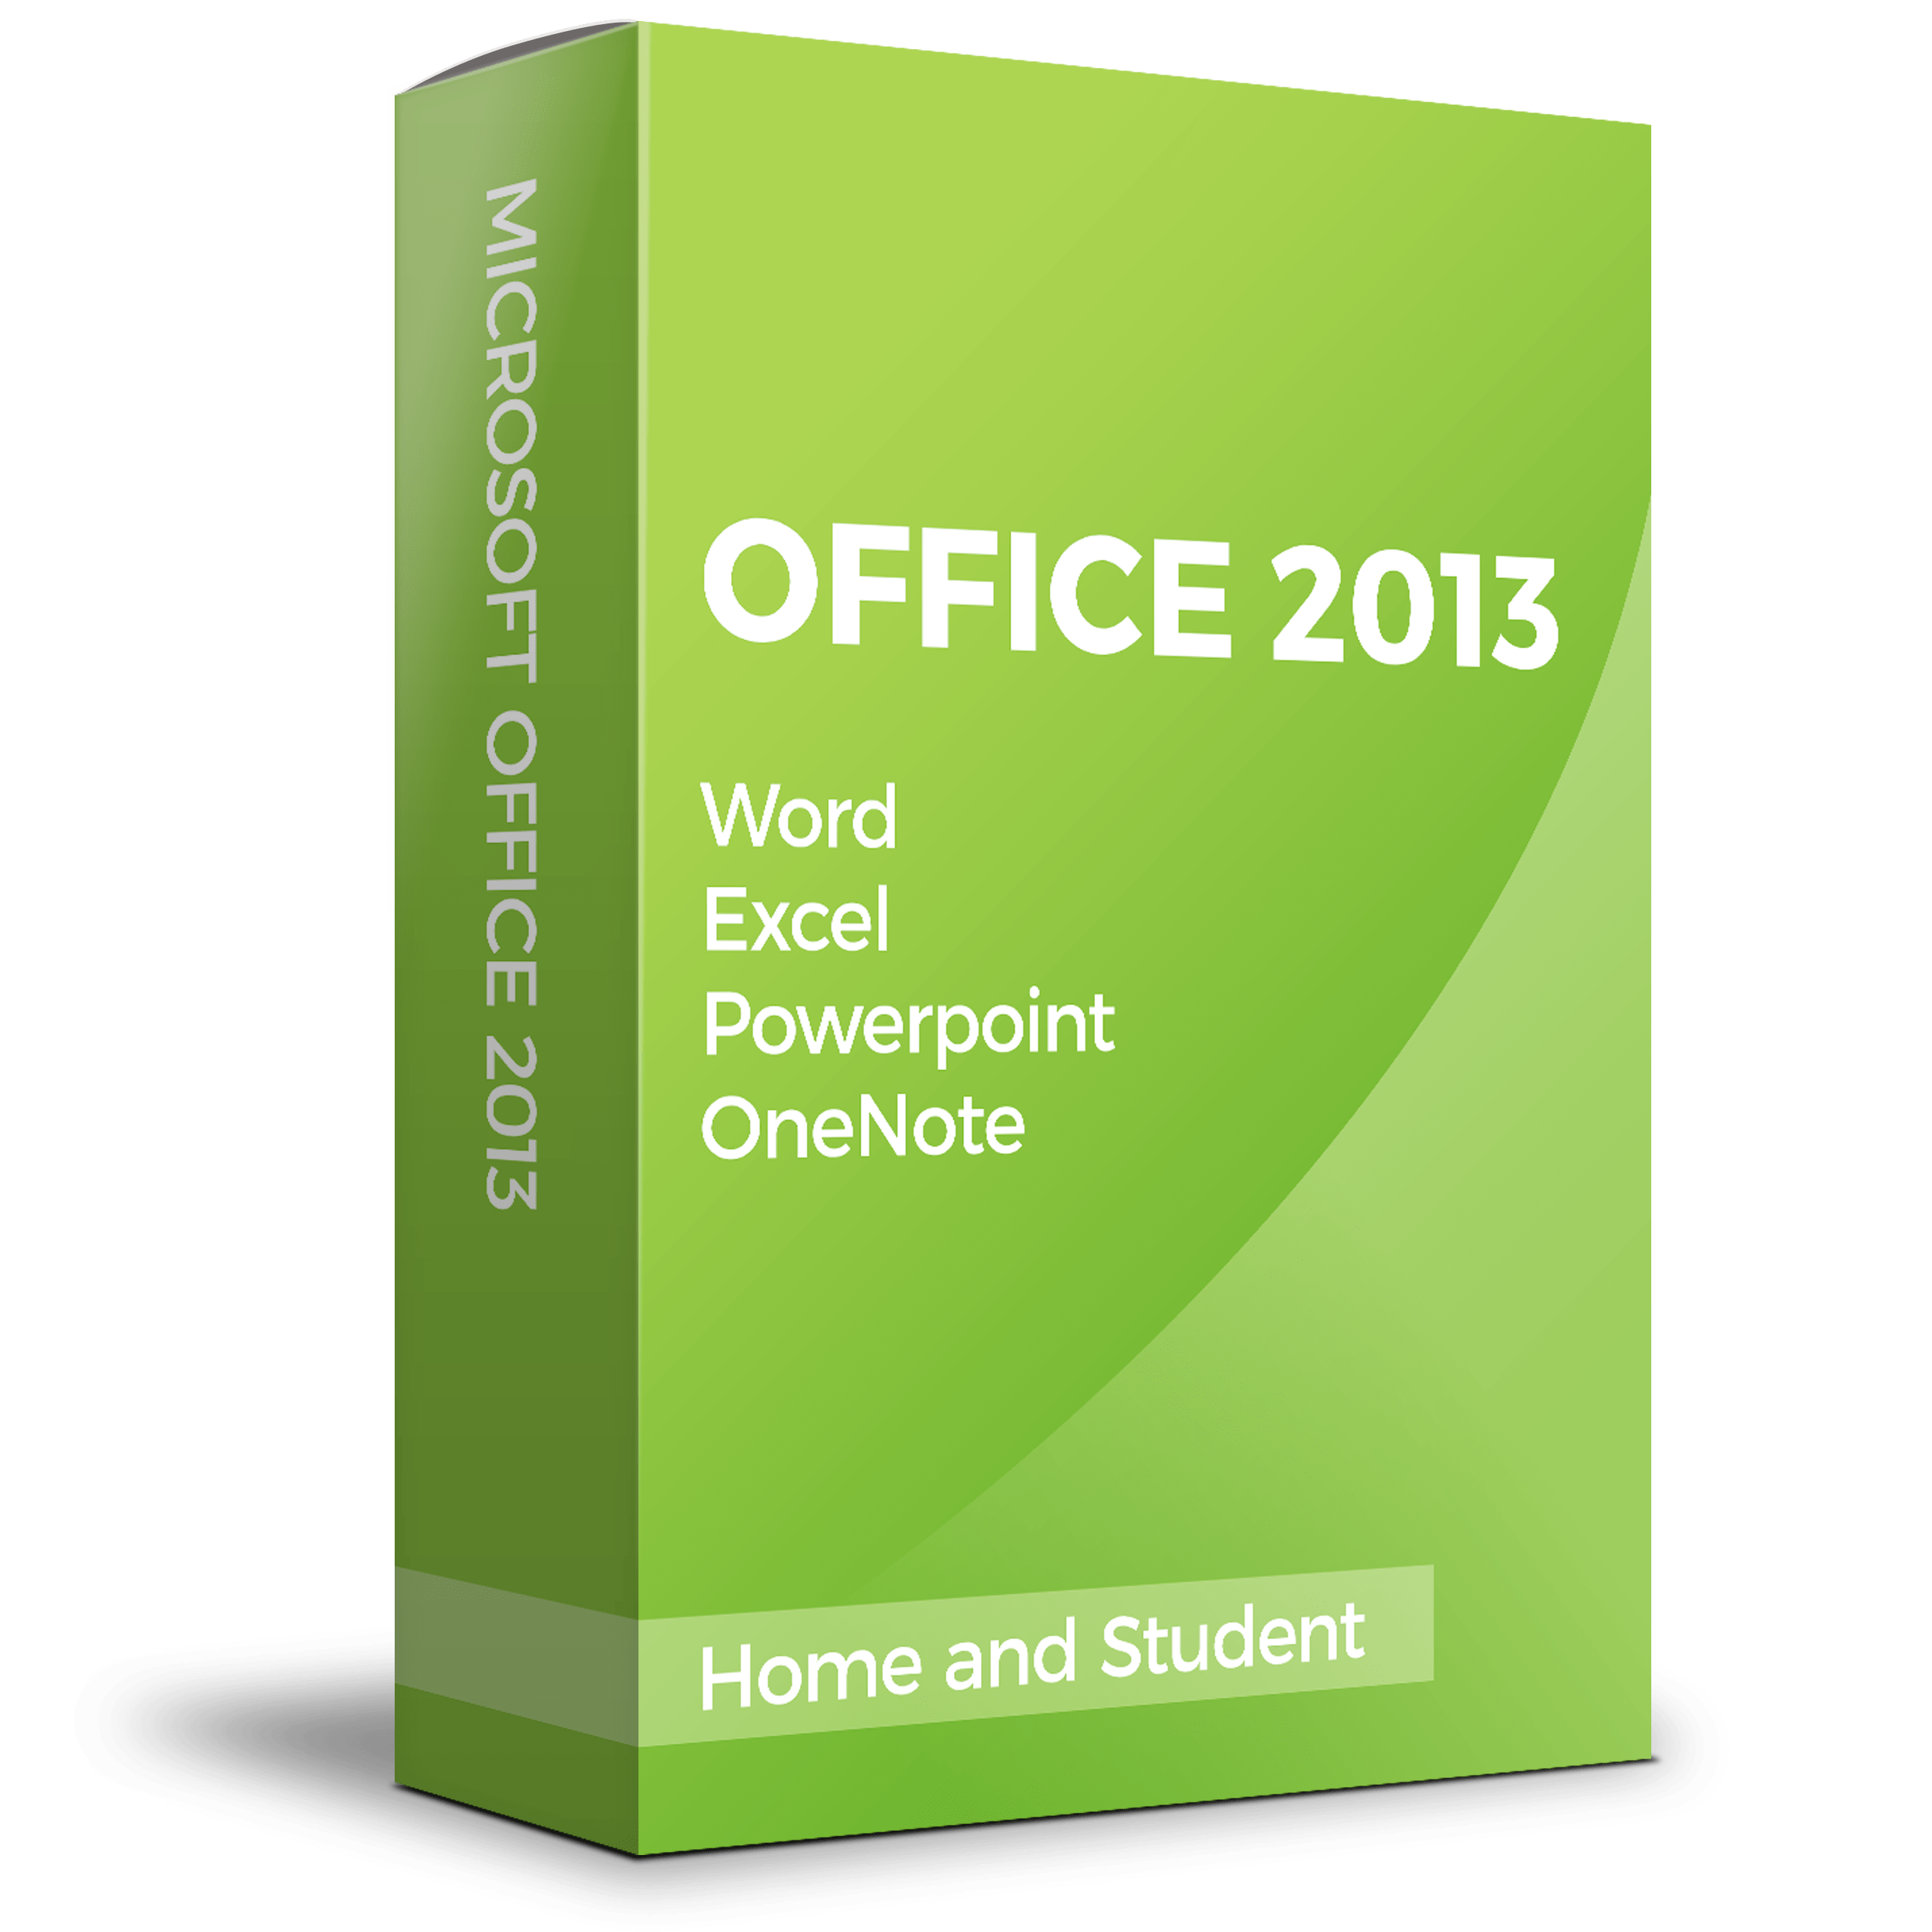 Office 2013 Home and Business. Microsoft Office 2013 professional. Microsoft Office 2013 professional Plus. Office 2013 Home and student.